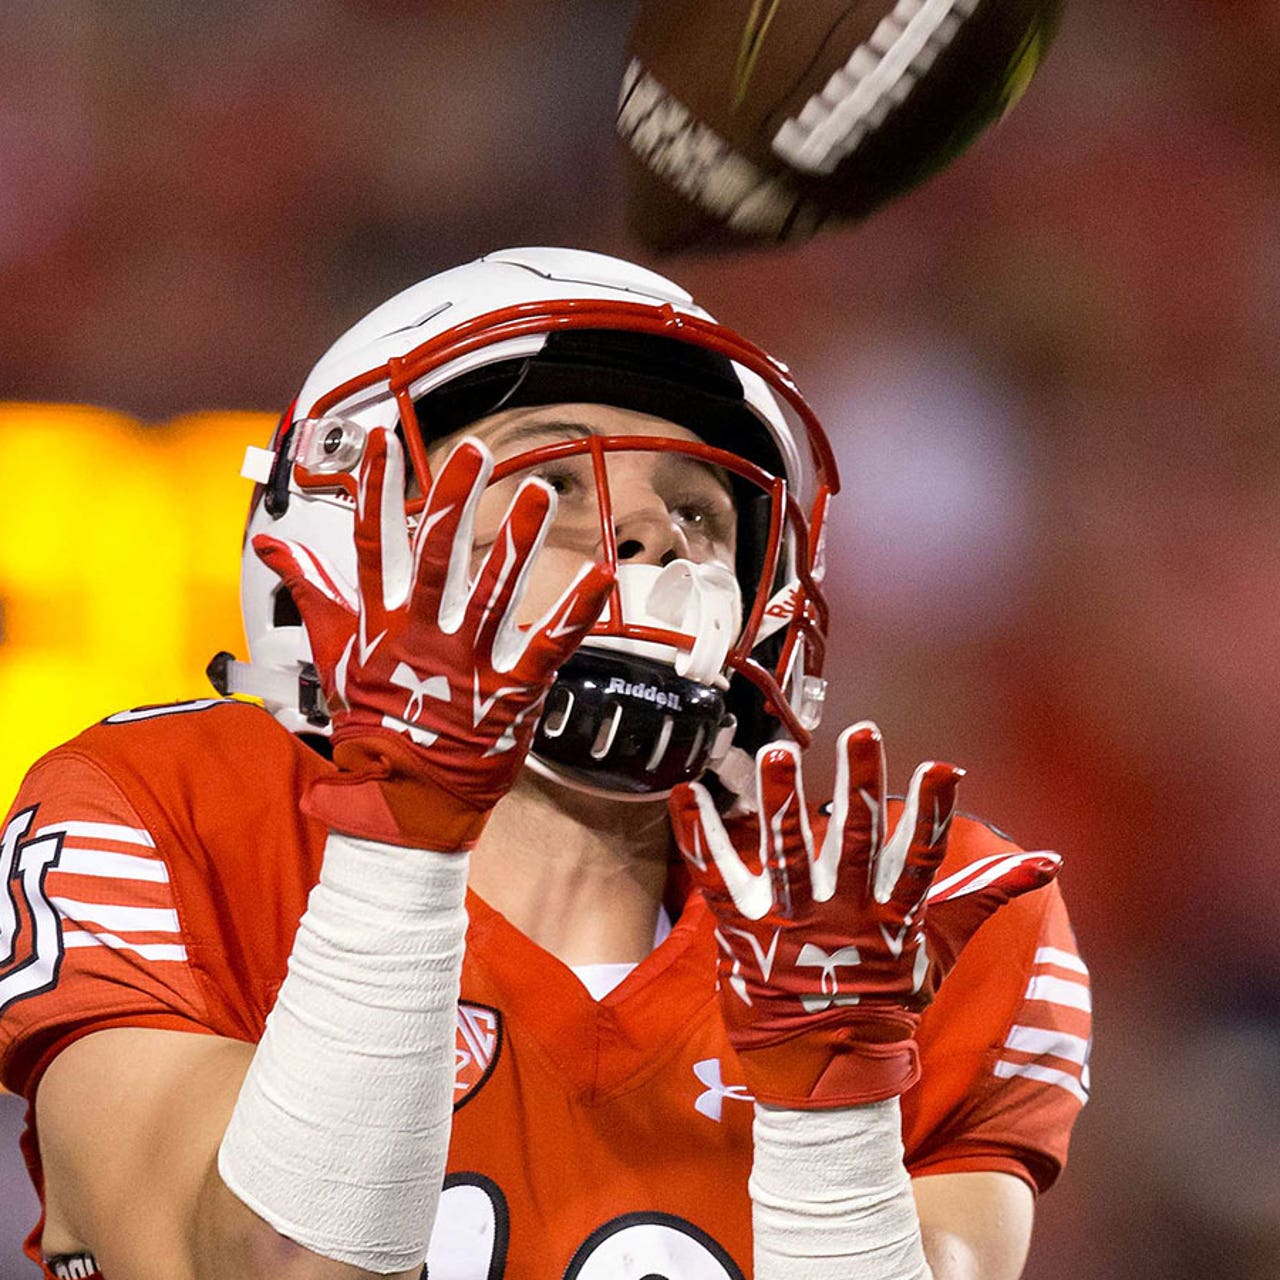 Utah freshman WR Britain Covey will take Mormon mission after